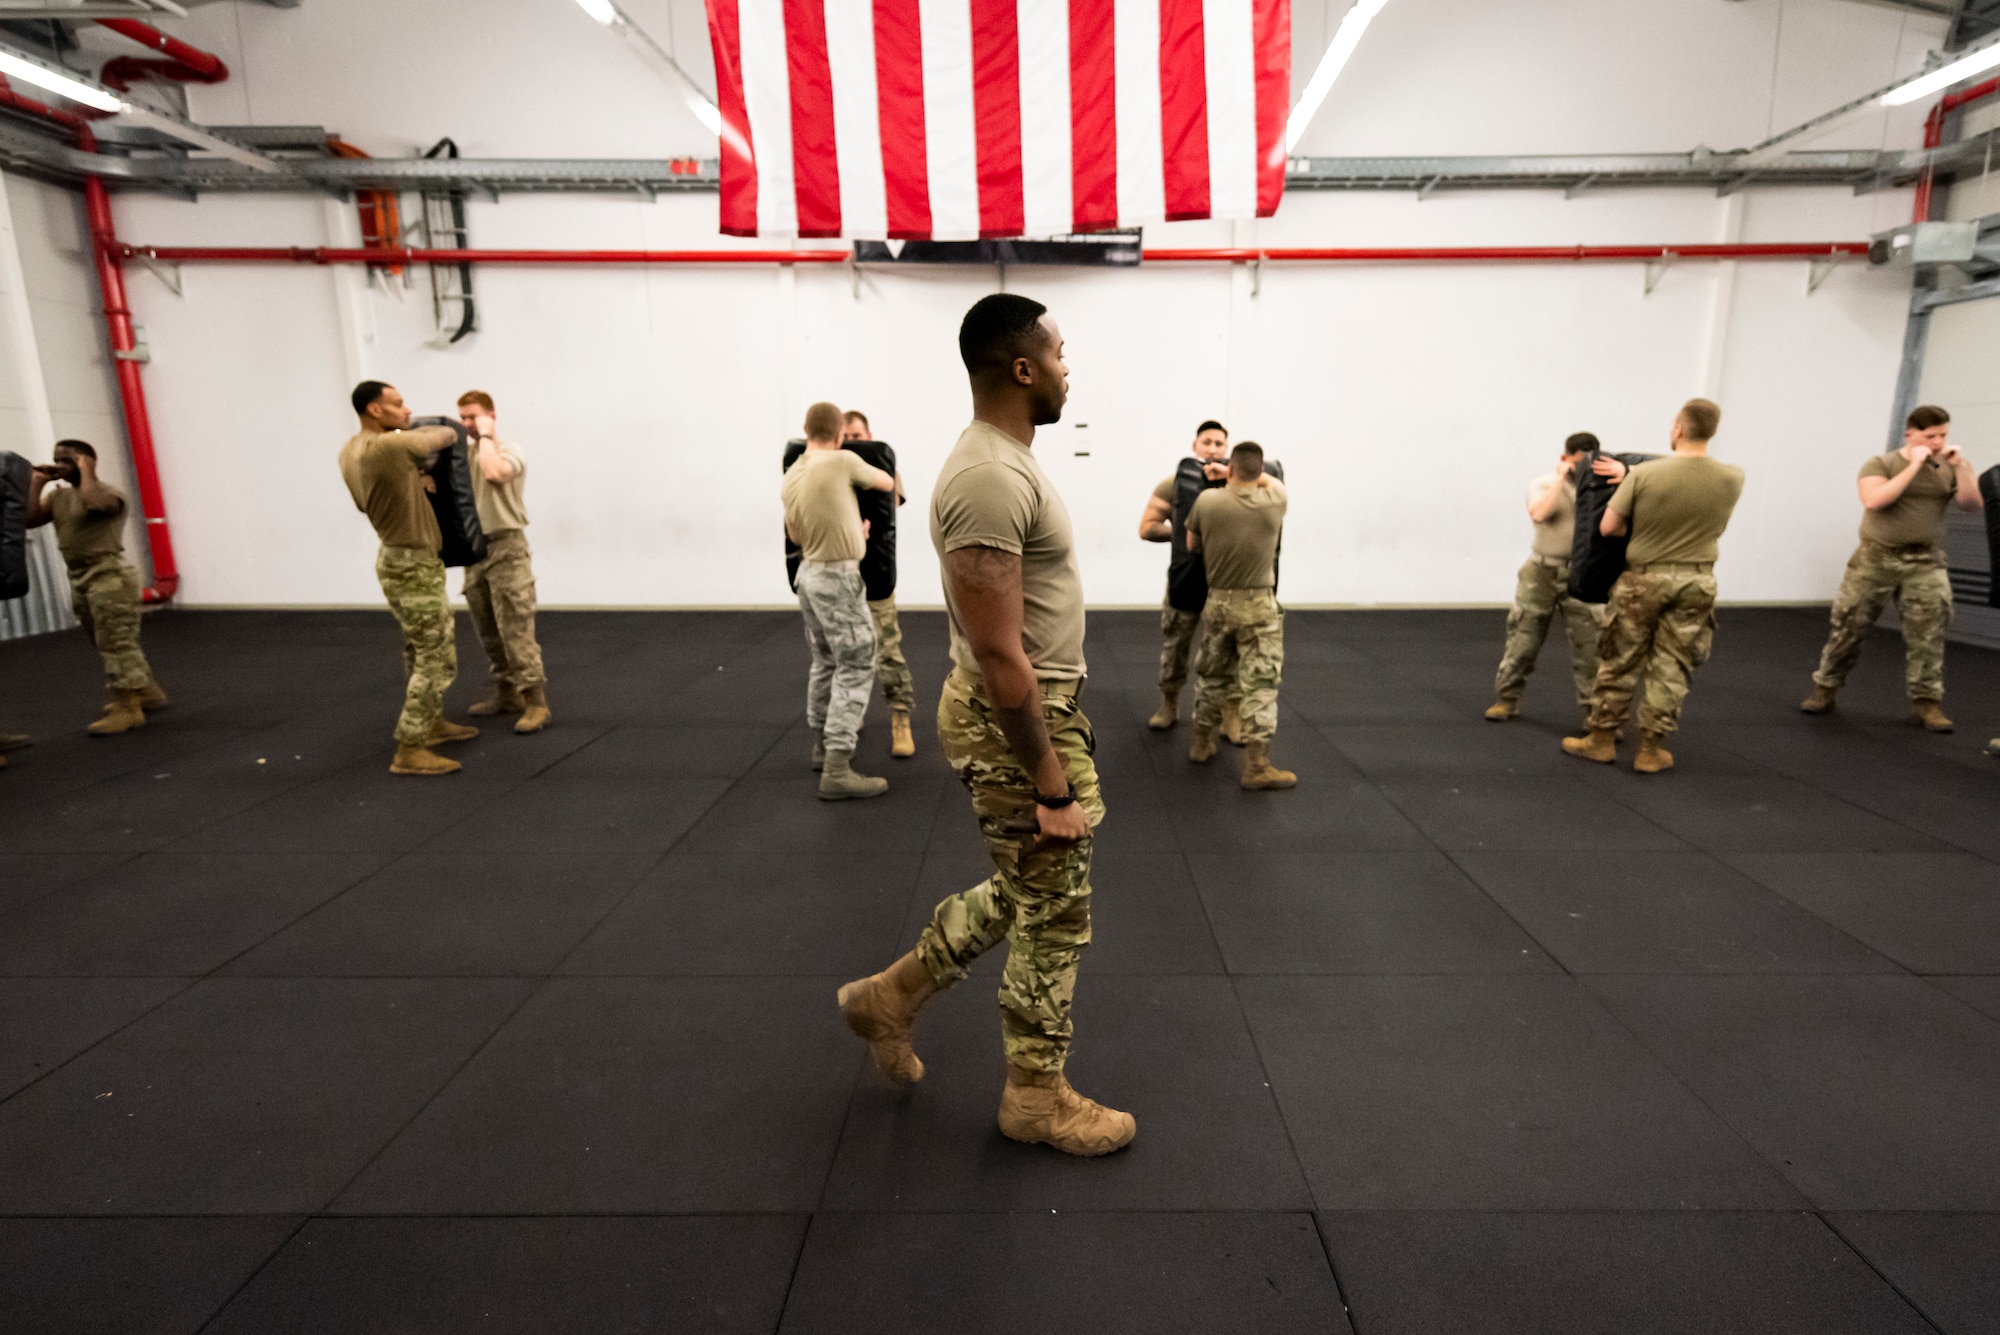 U.S. Air Force Airmen train on baton striking using shield bags during a Leader Led Training Course at Ramstein Air Base, Germany, Dec. 6, 2019. The Air Force designed the LLTC allow defenders from around the Air Force to receive an instructor certification in ground combat skills. (U.S. Air Force photo by Staff Sgt. Devin Nothstine)